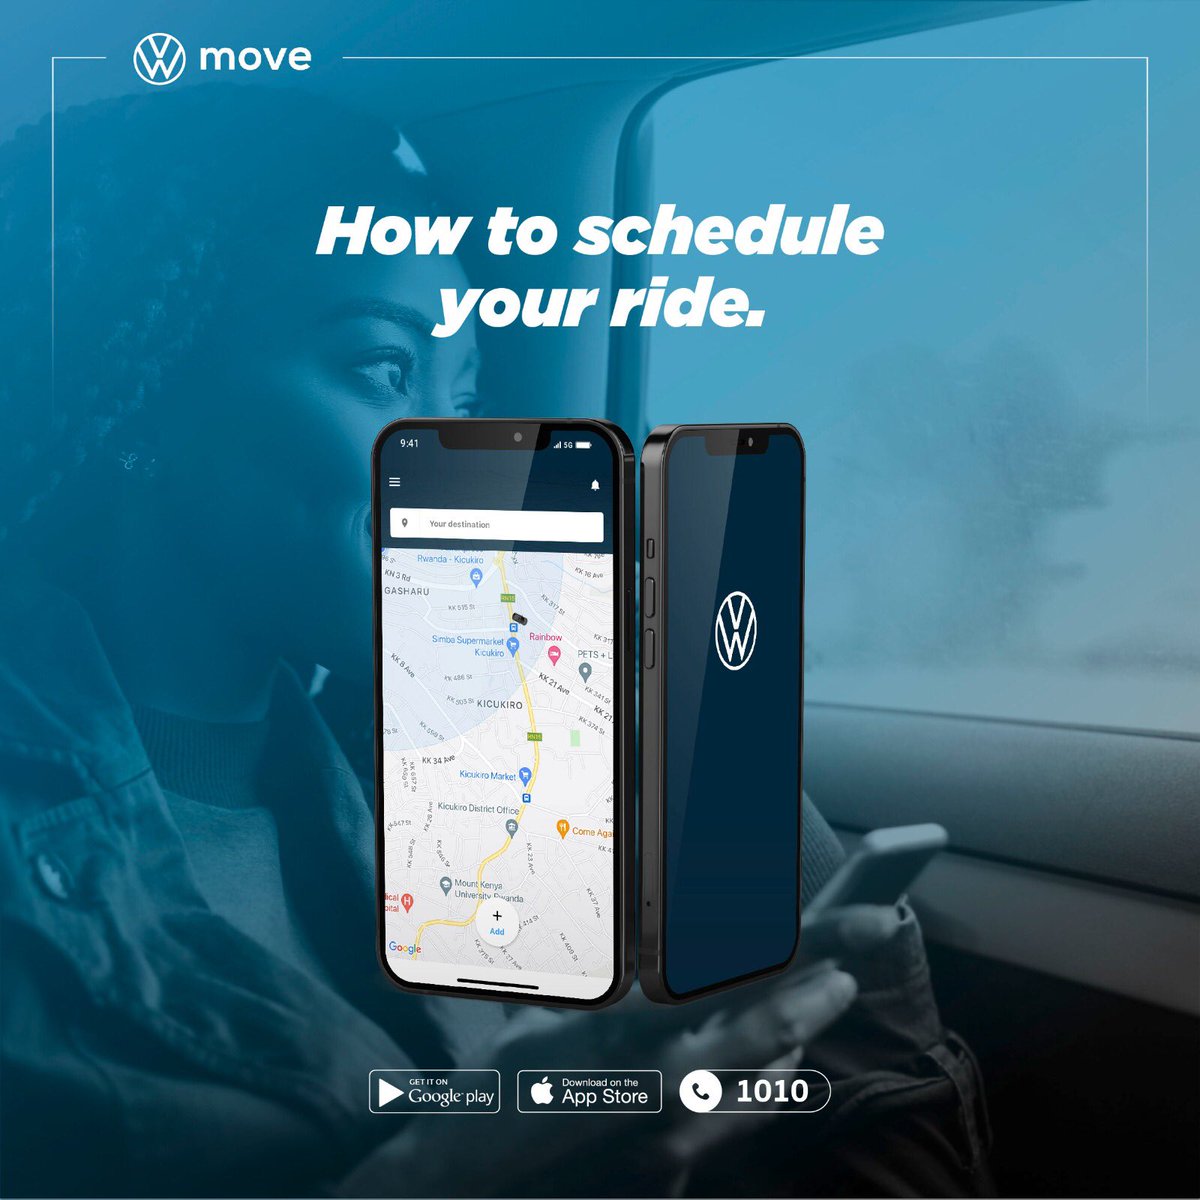 We're excited to announce our latest app feature:
 - You can now schedule your ride up to 6 hours in advance. Book between 1 hour to 6 hours before your journey, and let us take care of the rest. 

Here is how you can do it in 4 steps (A THREAD 🧵) #MoveWithUs